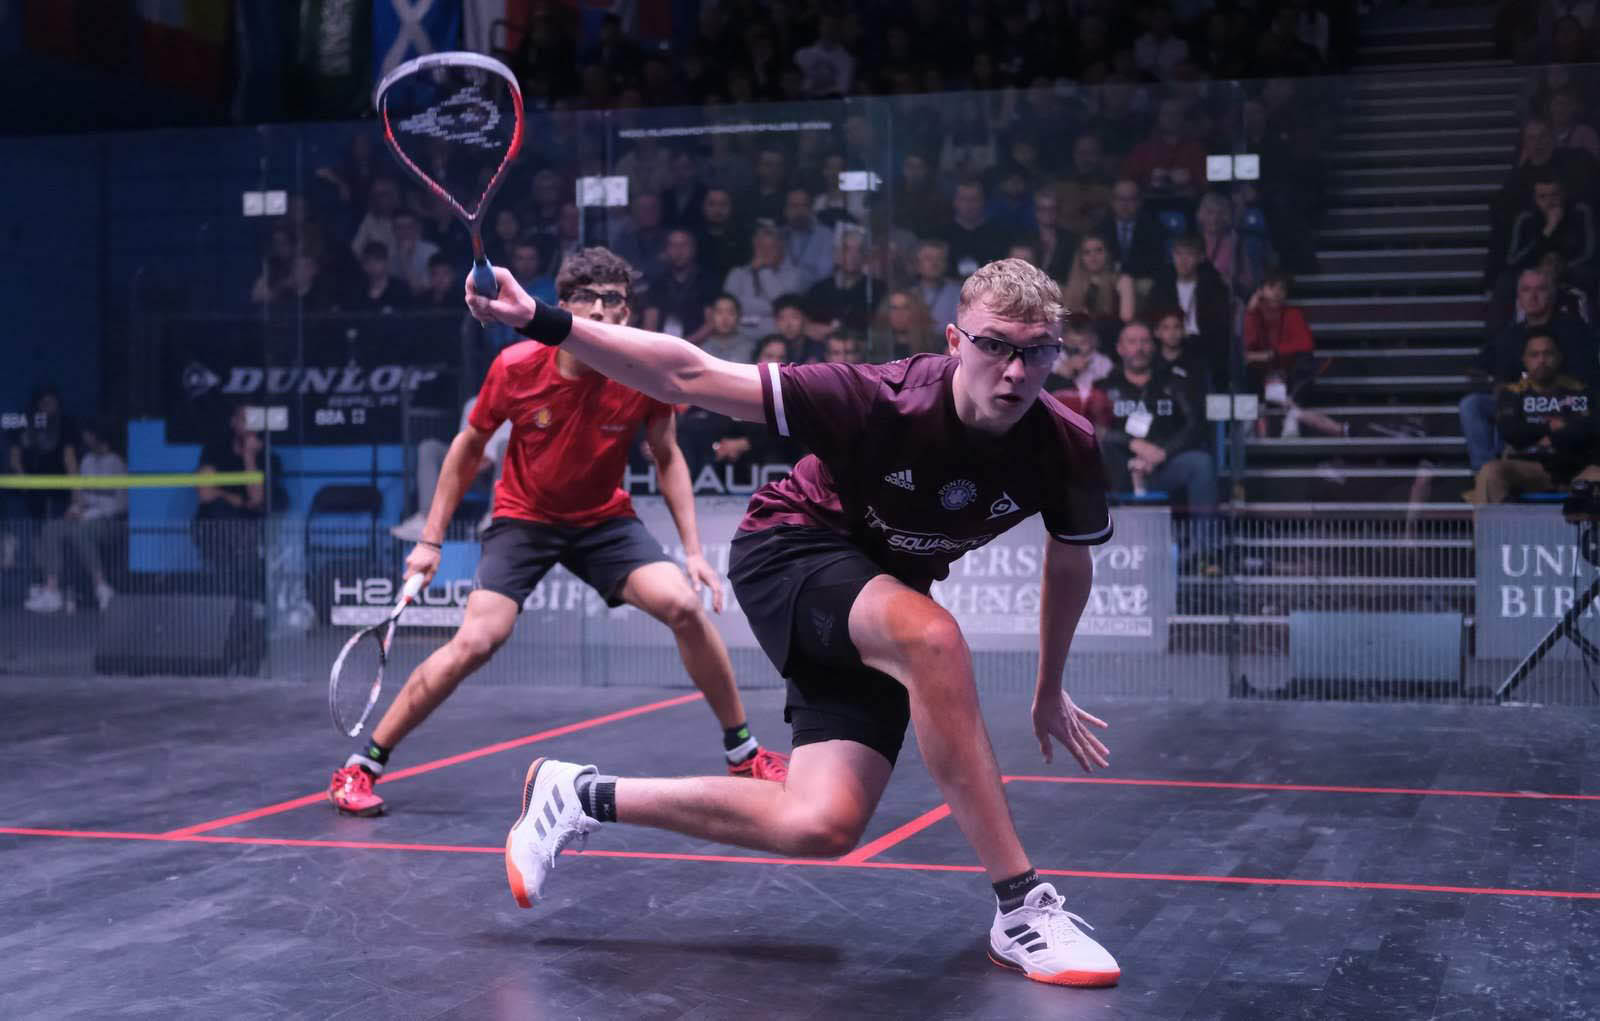 England Squash  British Junior Open cancelled due to COVID19